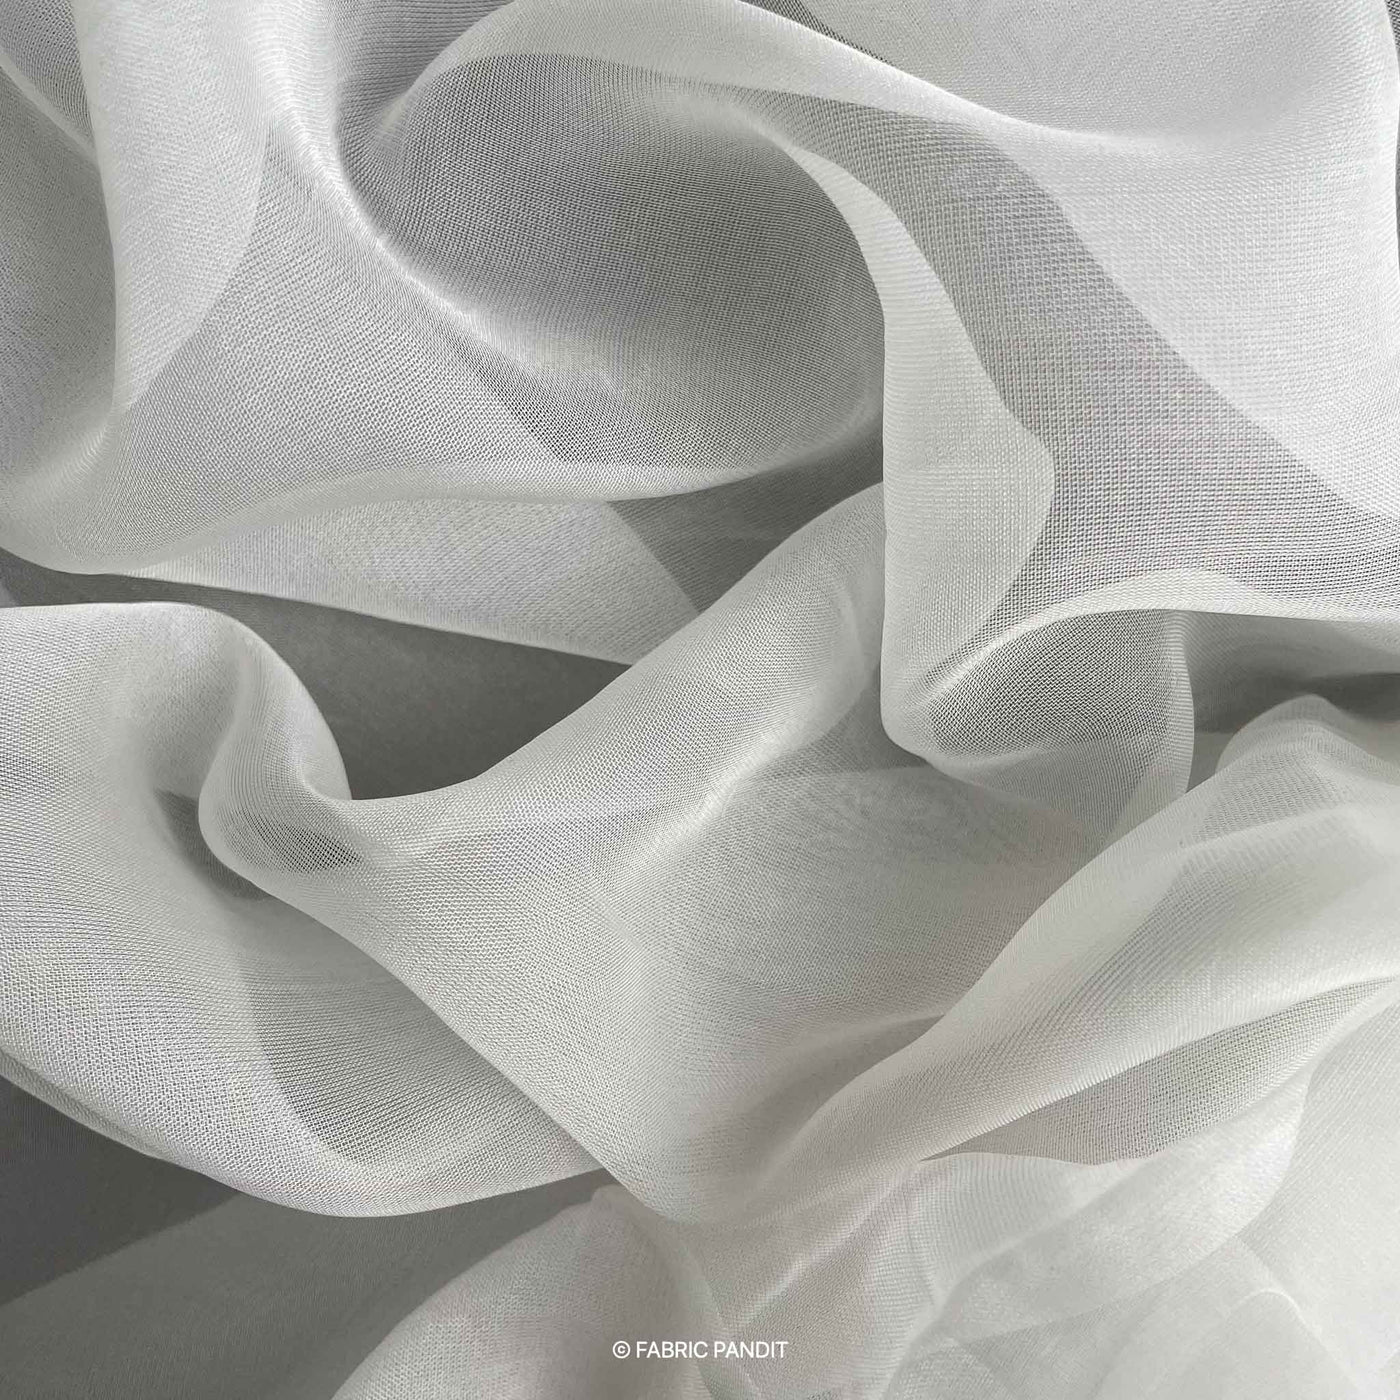 Dyeable Fabric Cut Piece (CUT PIECE) White Dyeable Pure Viscose Organza Plain Fabric (Width 44 inches)